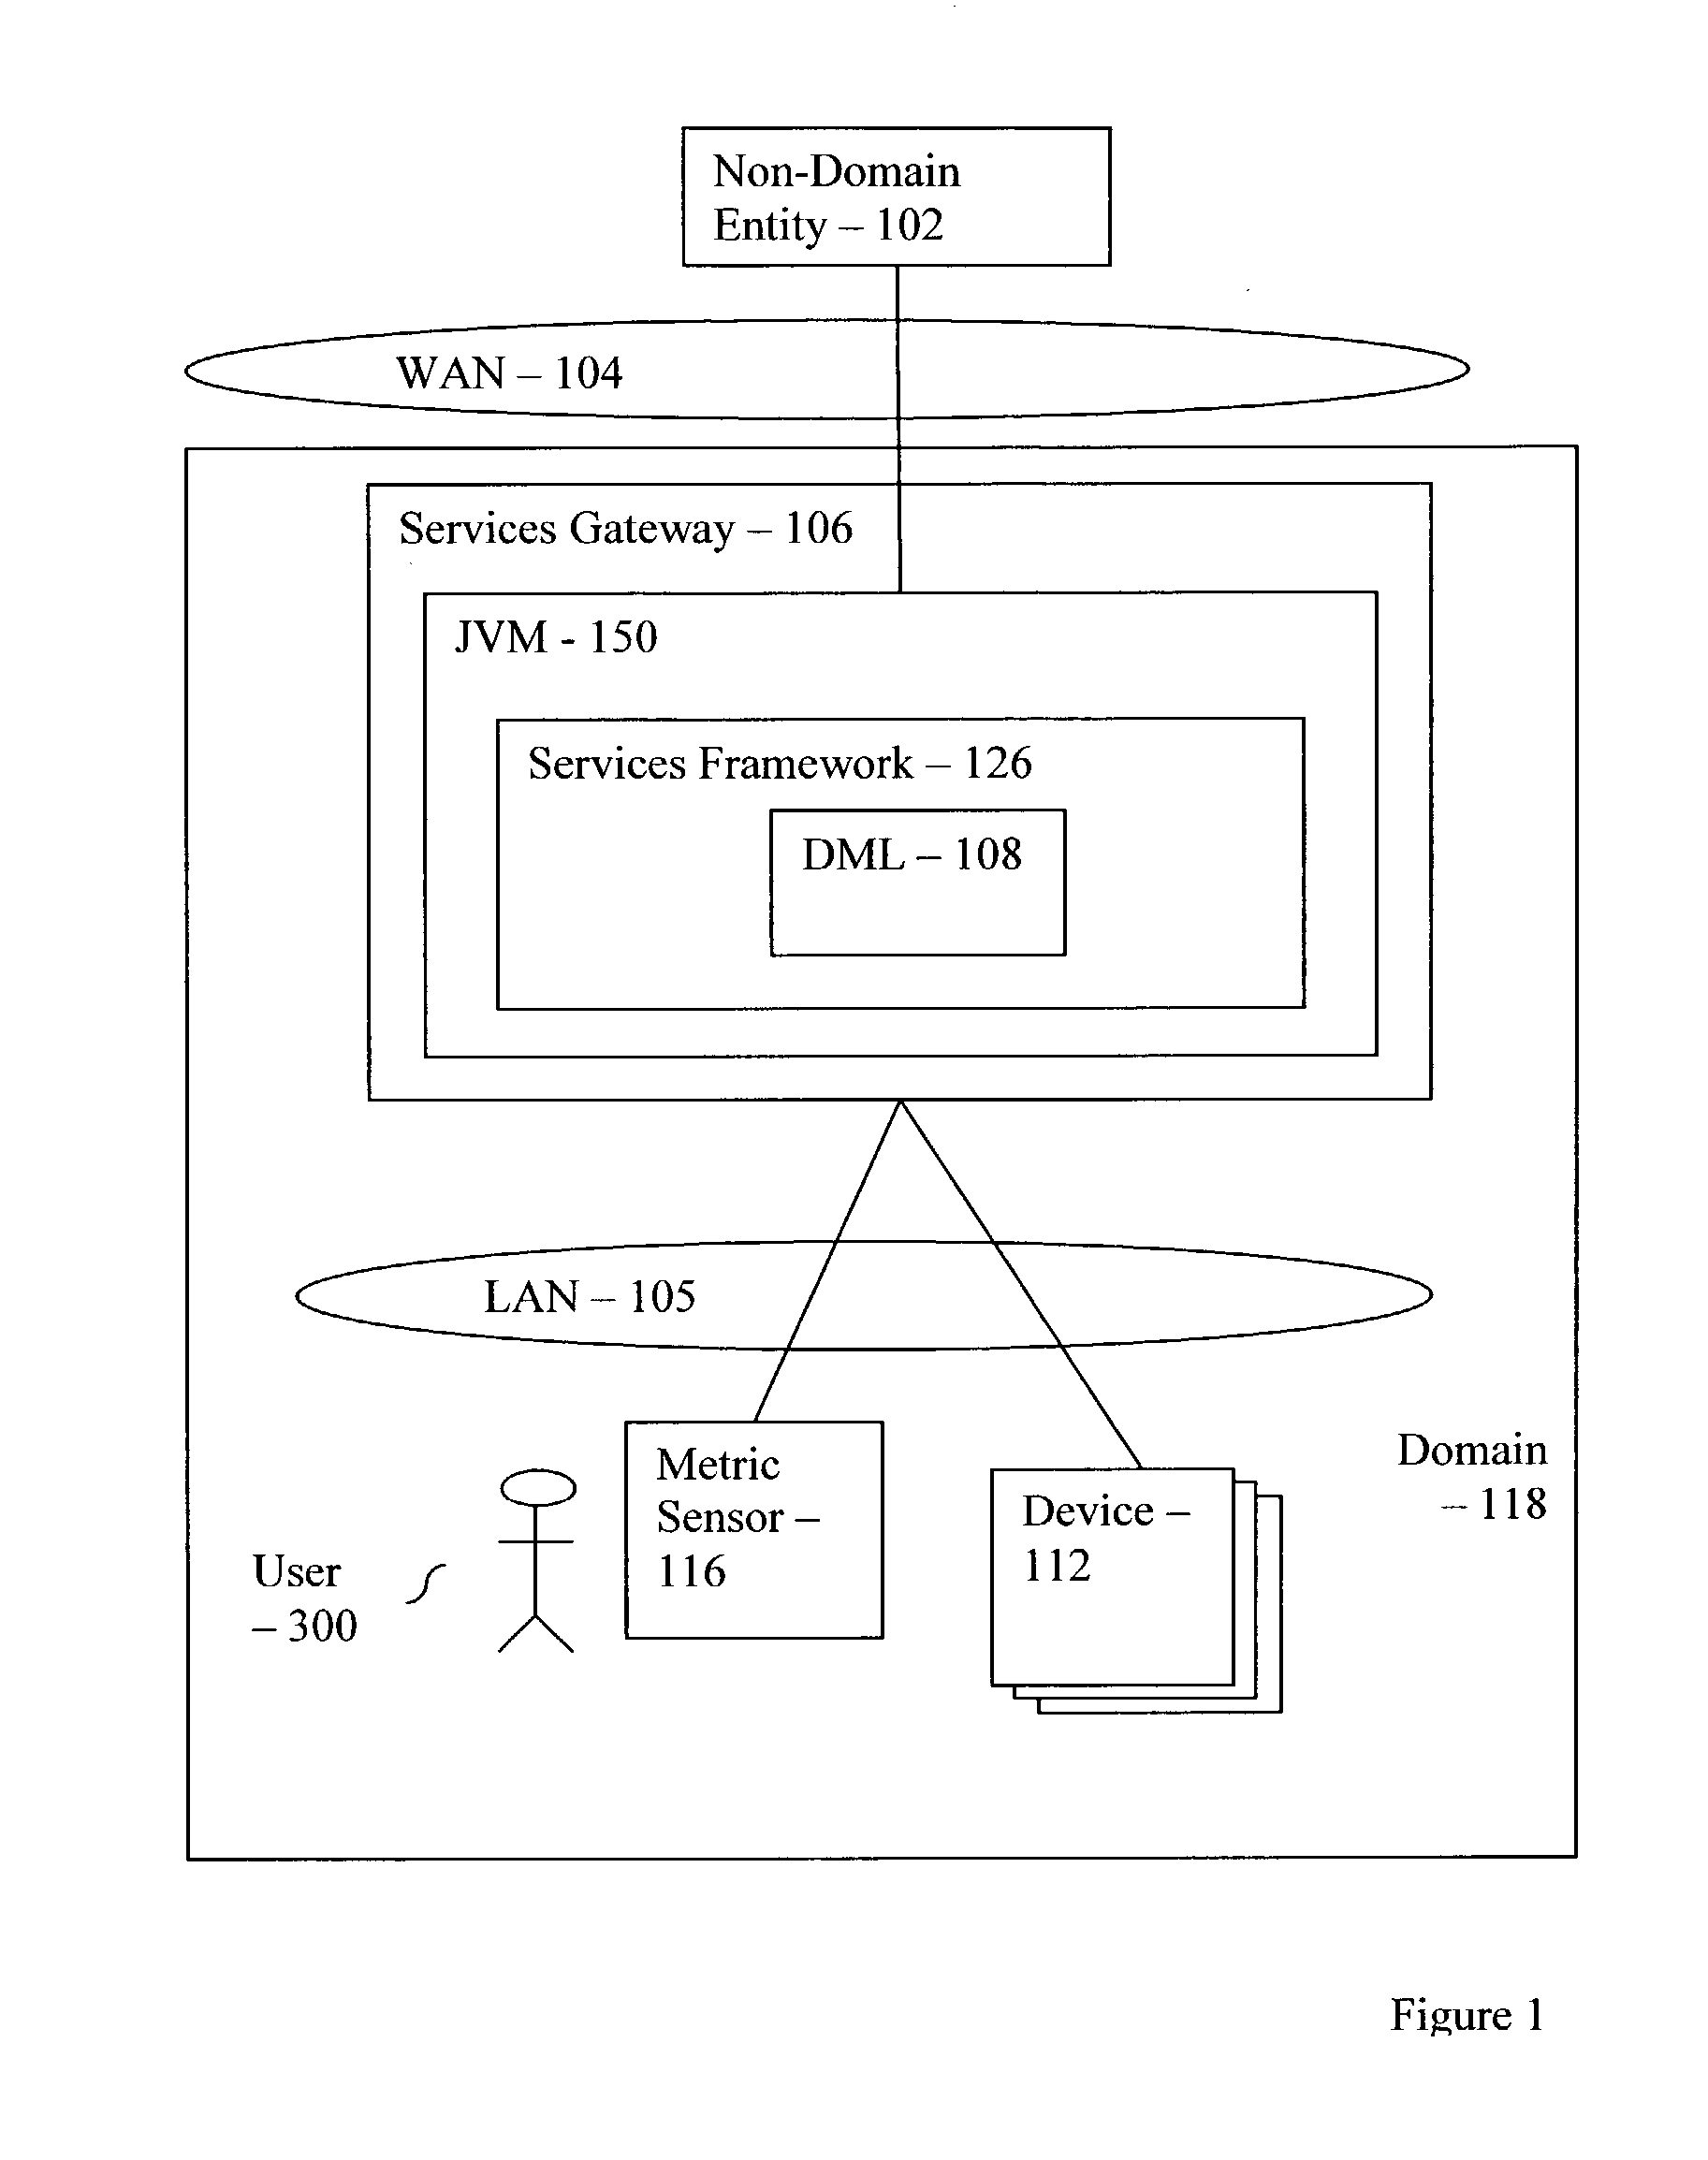 Method and system for administering devices including an action log